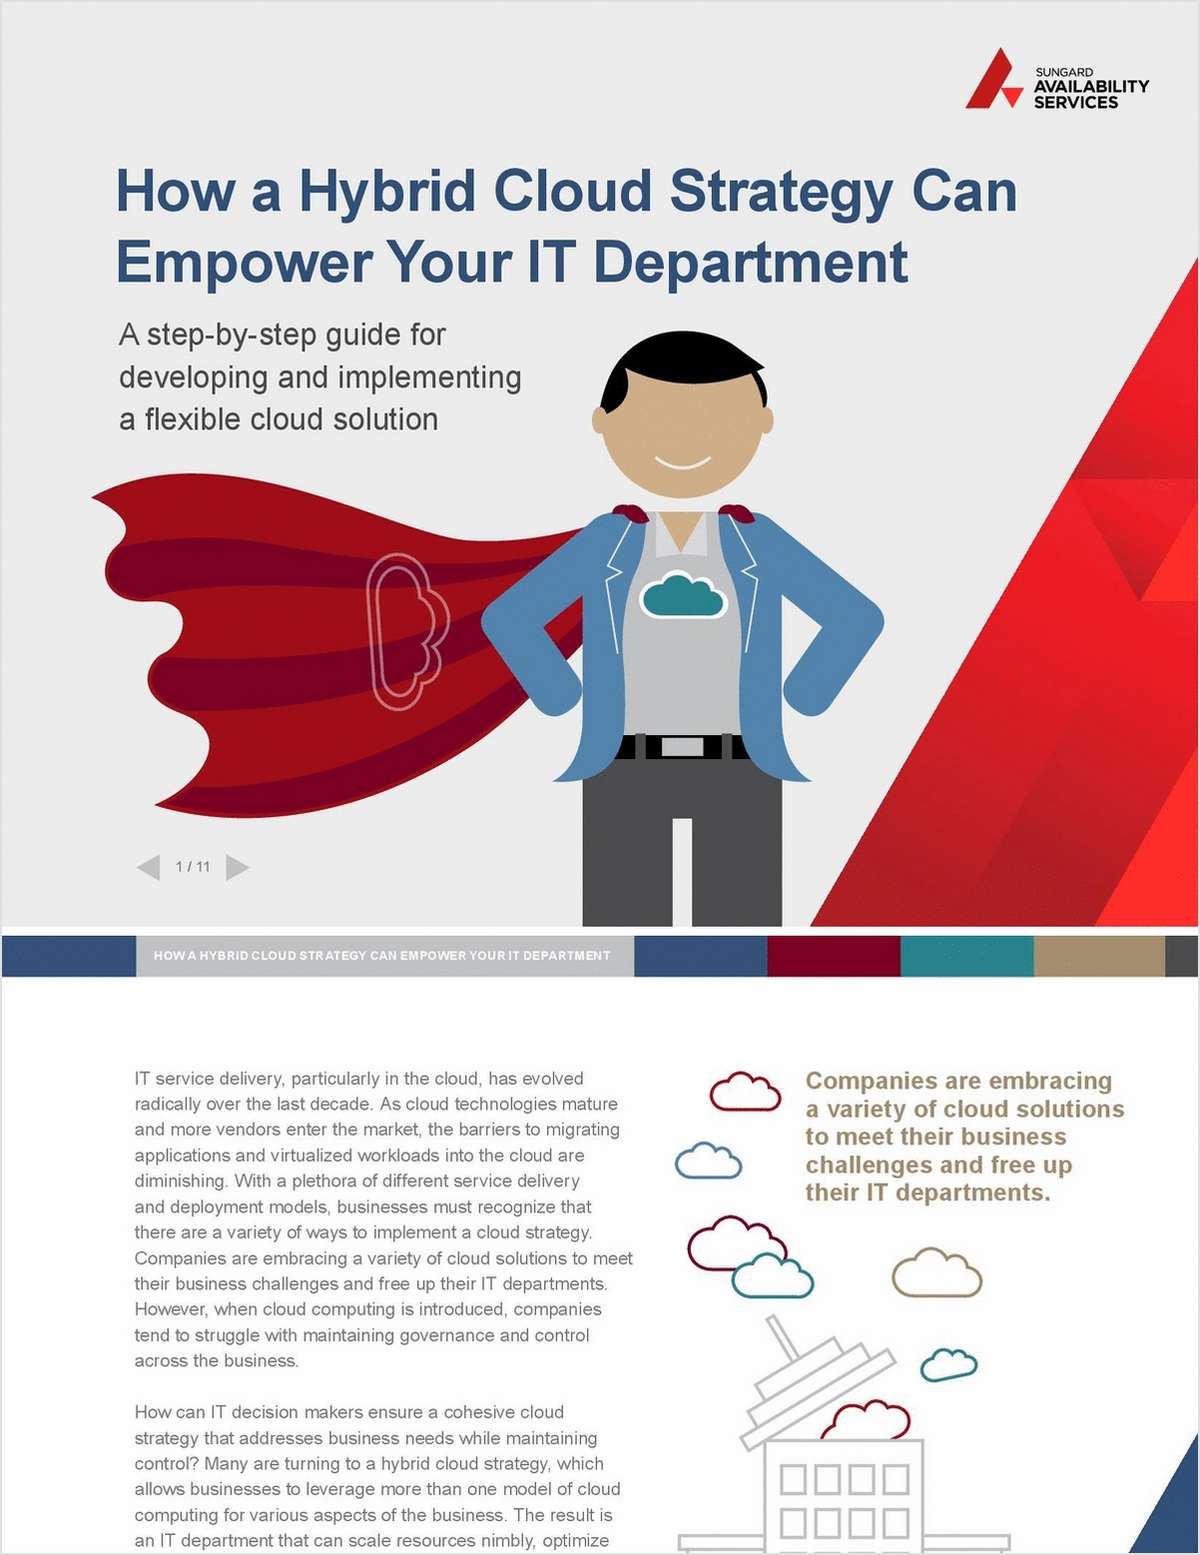 How a Hybrid Cloud Strategy Can Empower Your IT Department